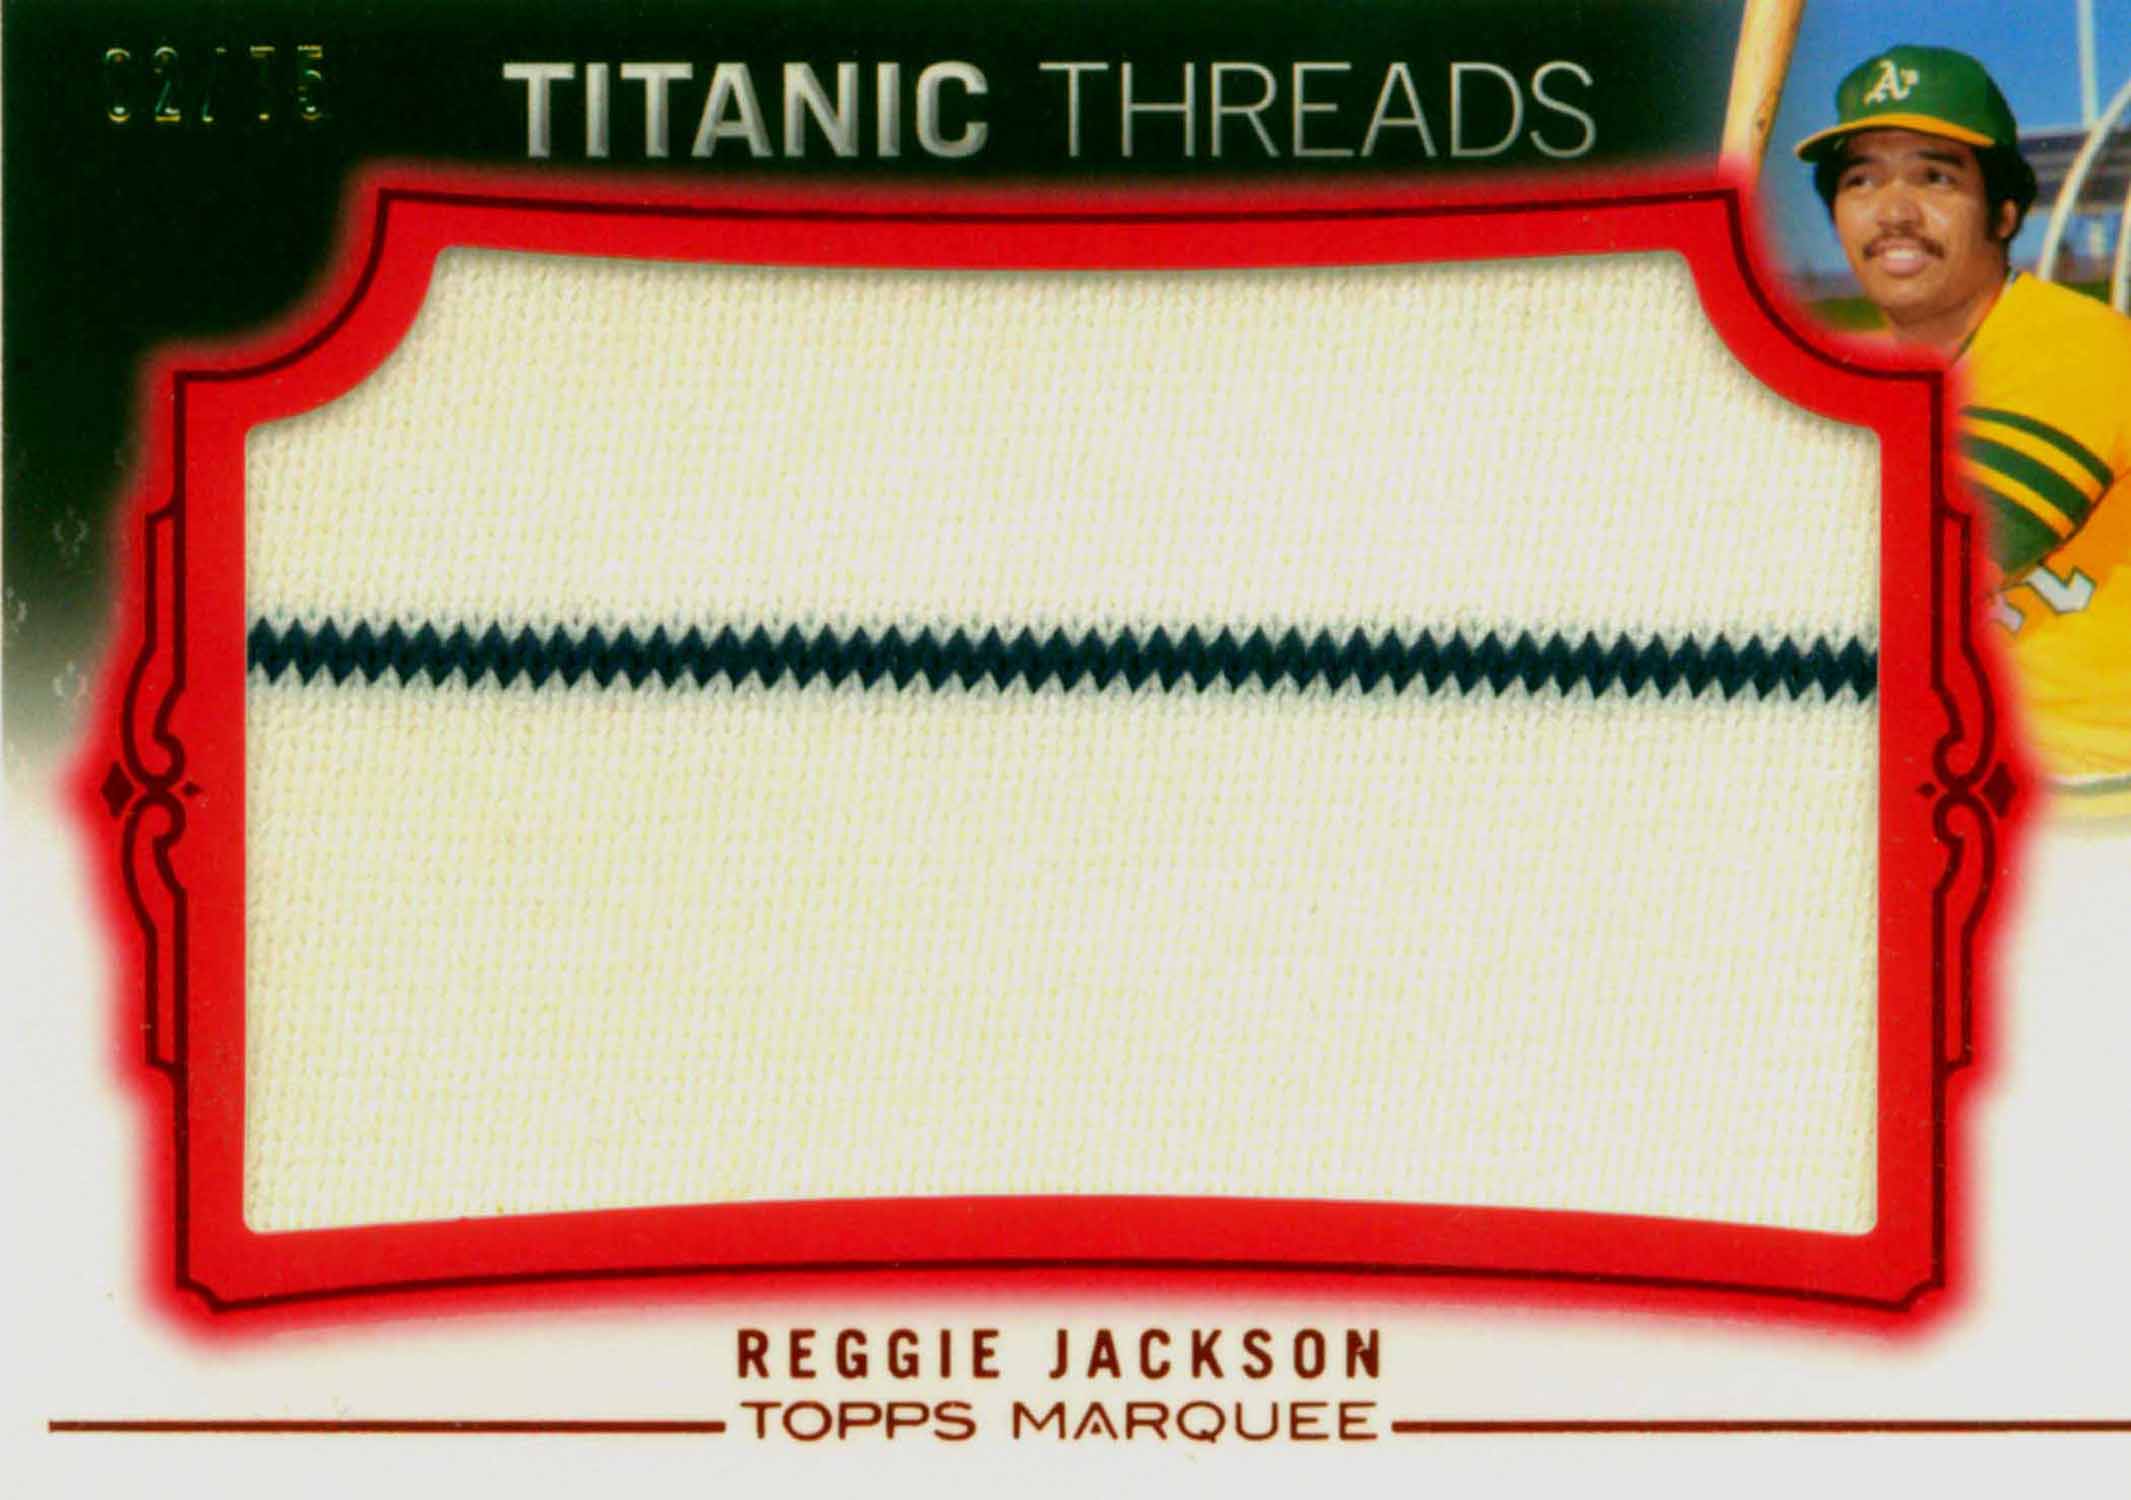 2011 Topps Marquee Titanic Threads Red